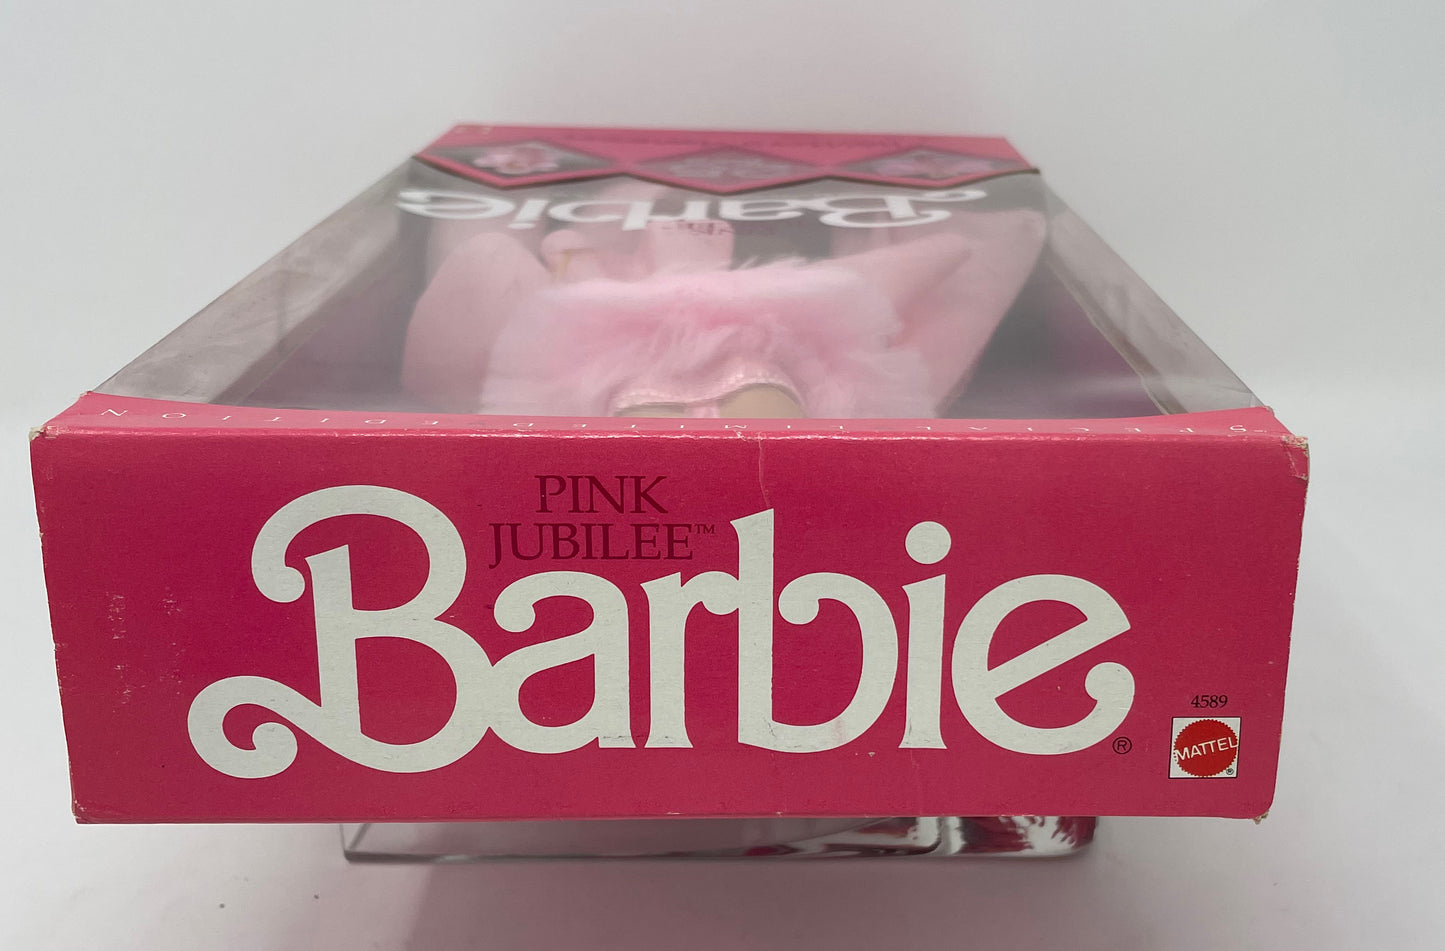 PINK JUBILEE BARBIE - WALMART 25TH ANNIVERSARY SPECIAL LIMITED EDITION #4589 - MATTEL 1987